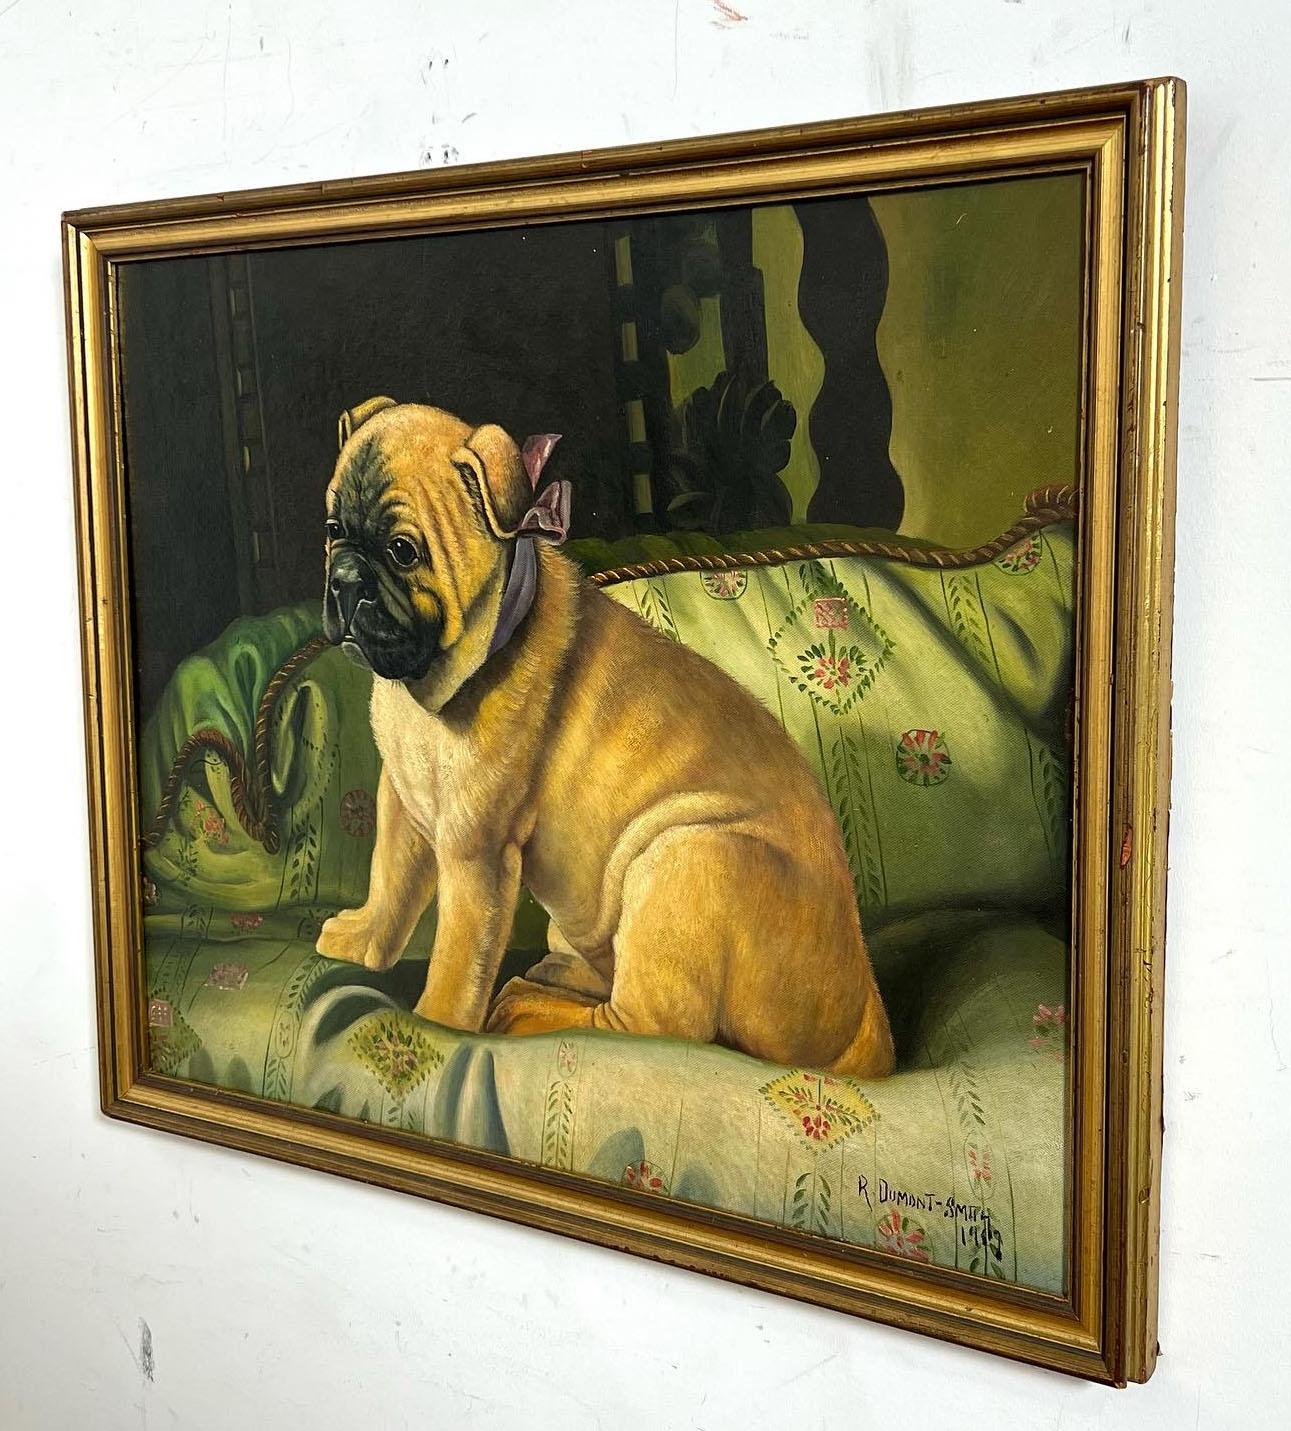 British Portrait of a Pampered Pug by Robert Dumont-Smith D. 1957